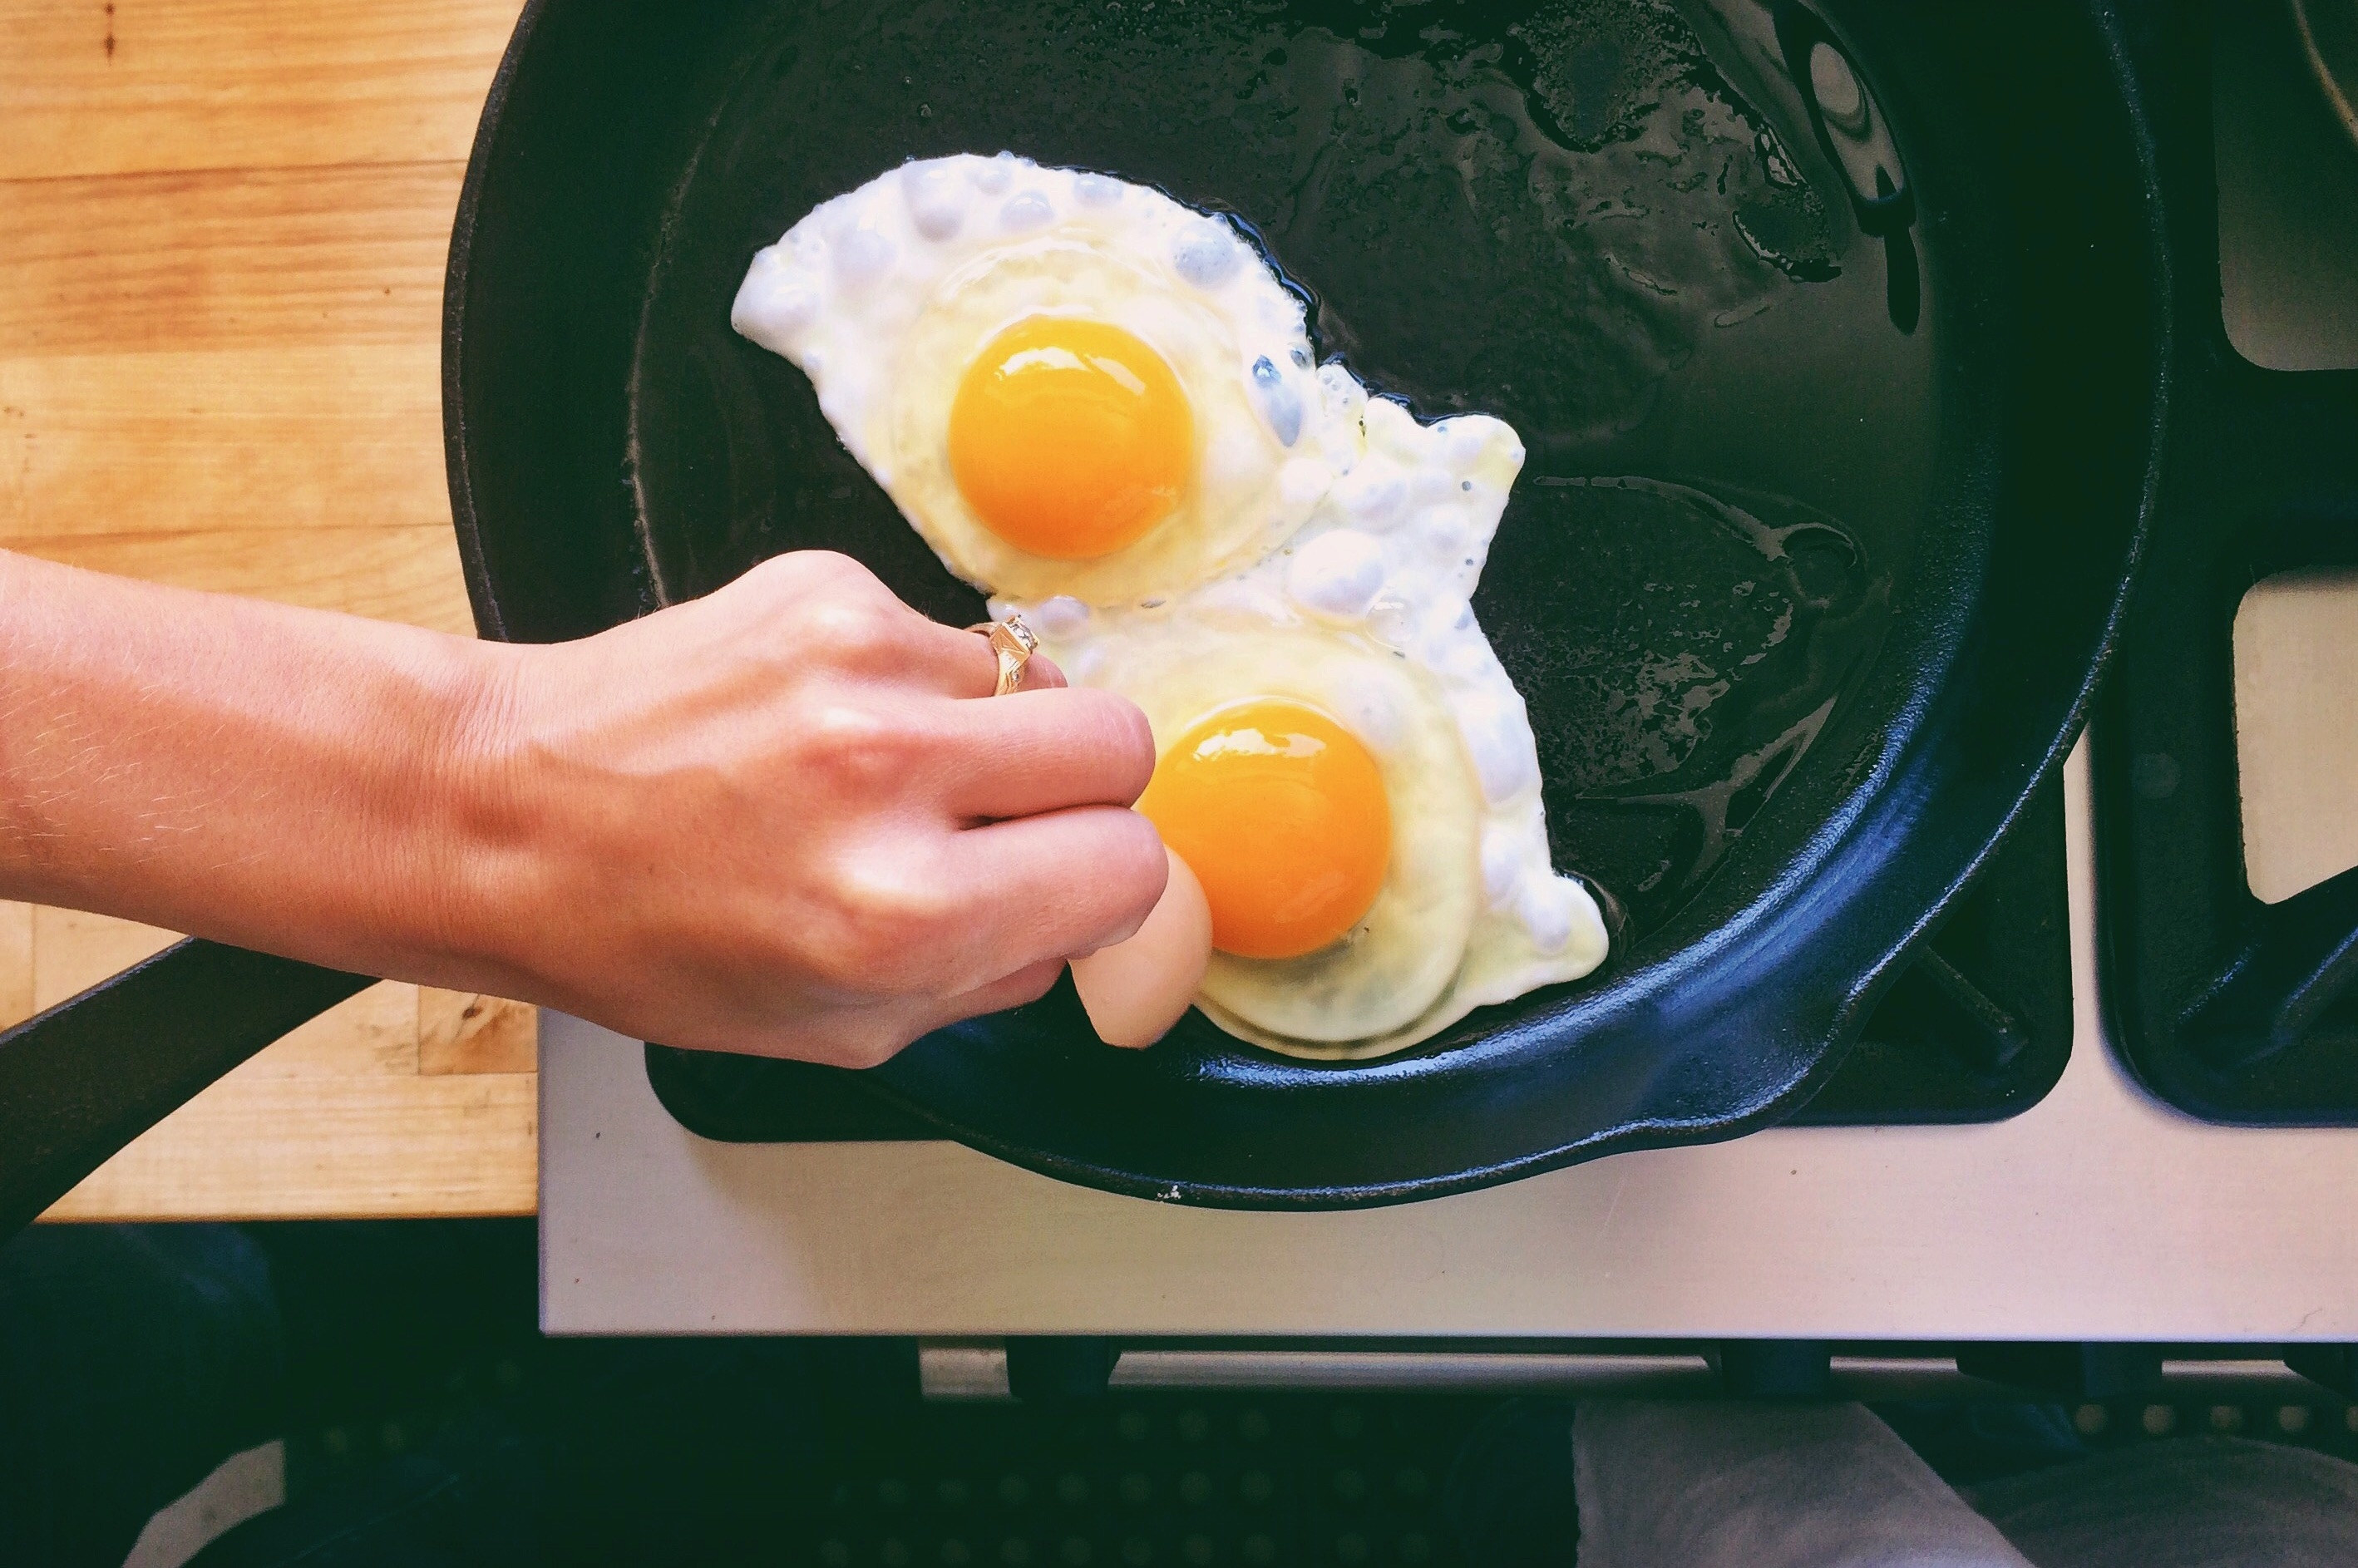 Frying eggs in a skillet.